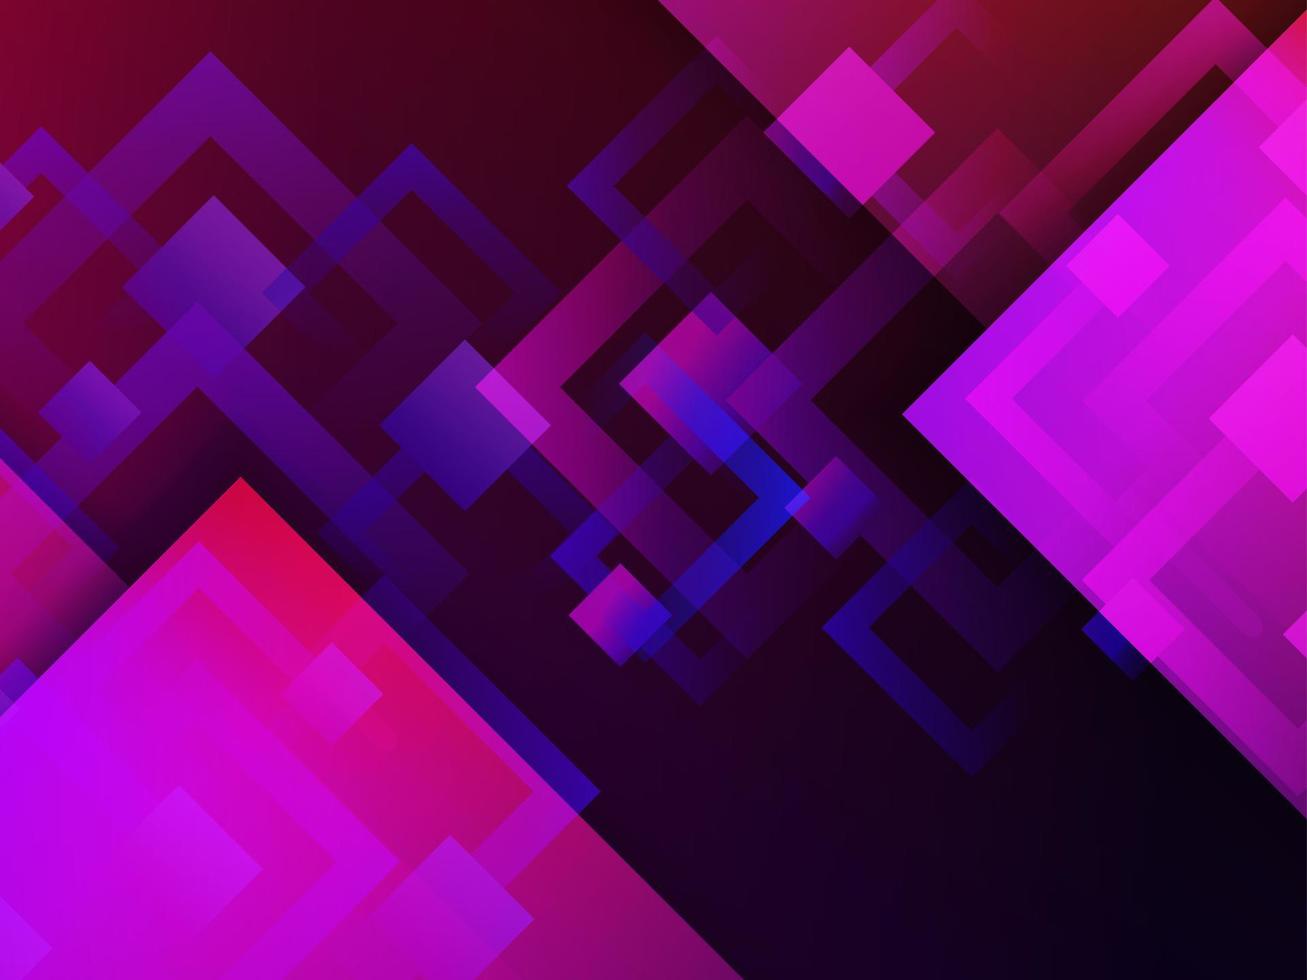 Abstract purple geometric modern decorative colorful design banner pattern background vector